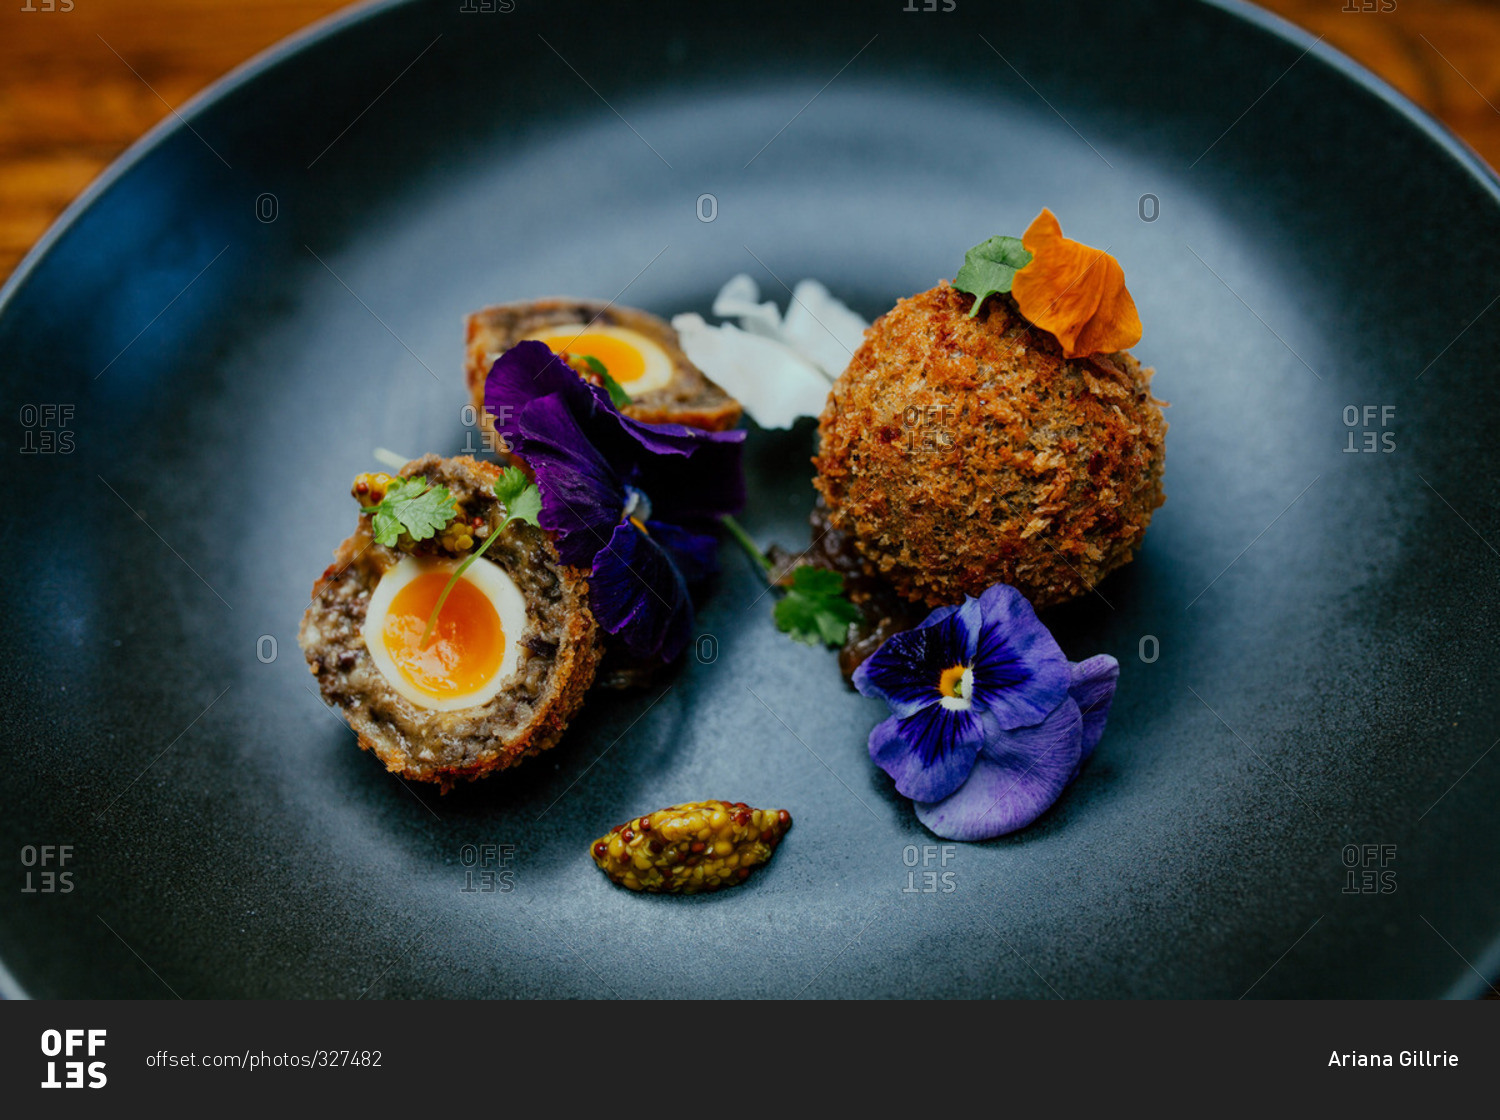 Deep fried eggs garnished with purple flowers